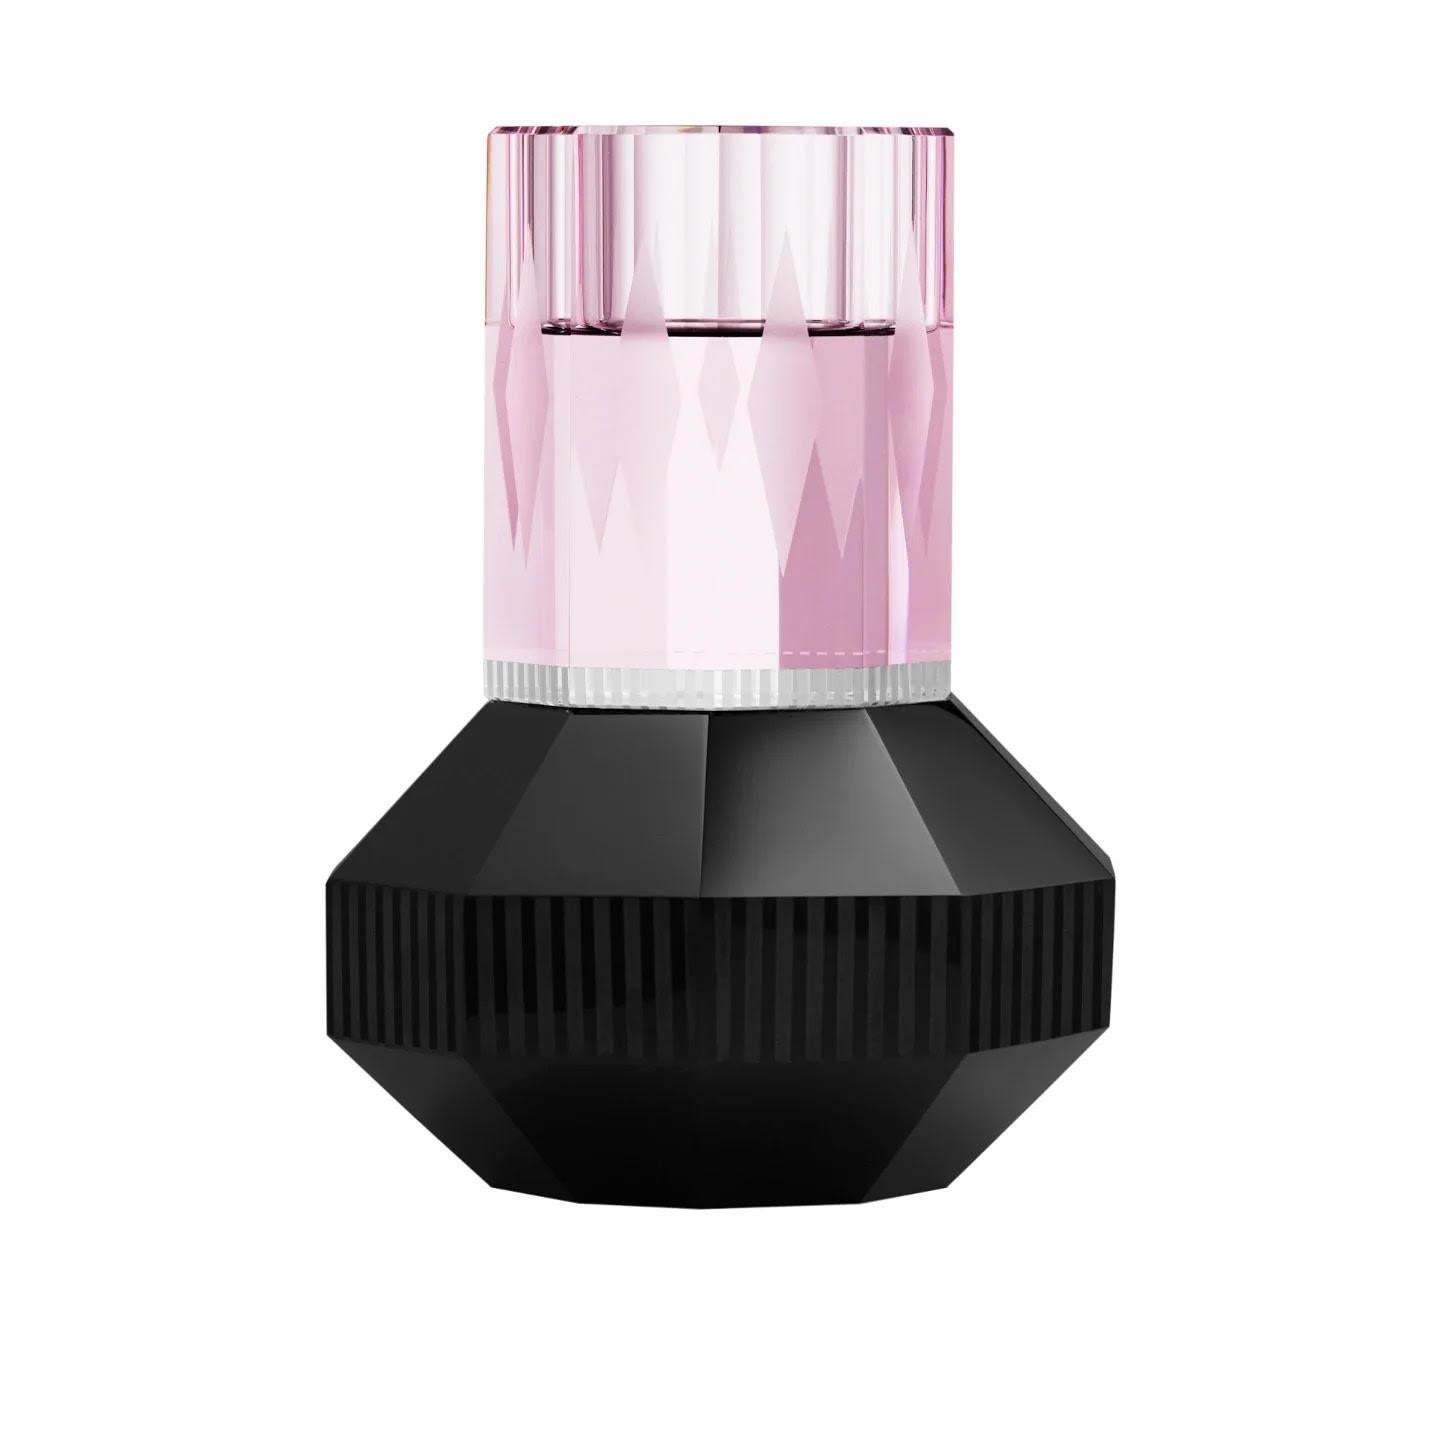 Crystal candleholder available in four colours: Yellow/Transparent/Violet, Pink/Yellow/Transparent, Blue/Amber/Cobalt and Pink/Transparent/Black. When the flames dance inside this candleholder, they reveal the magic of crystalline light, creating an